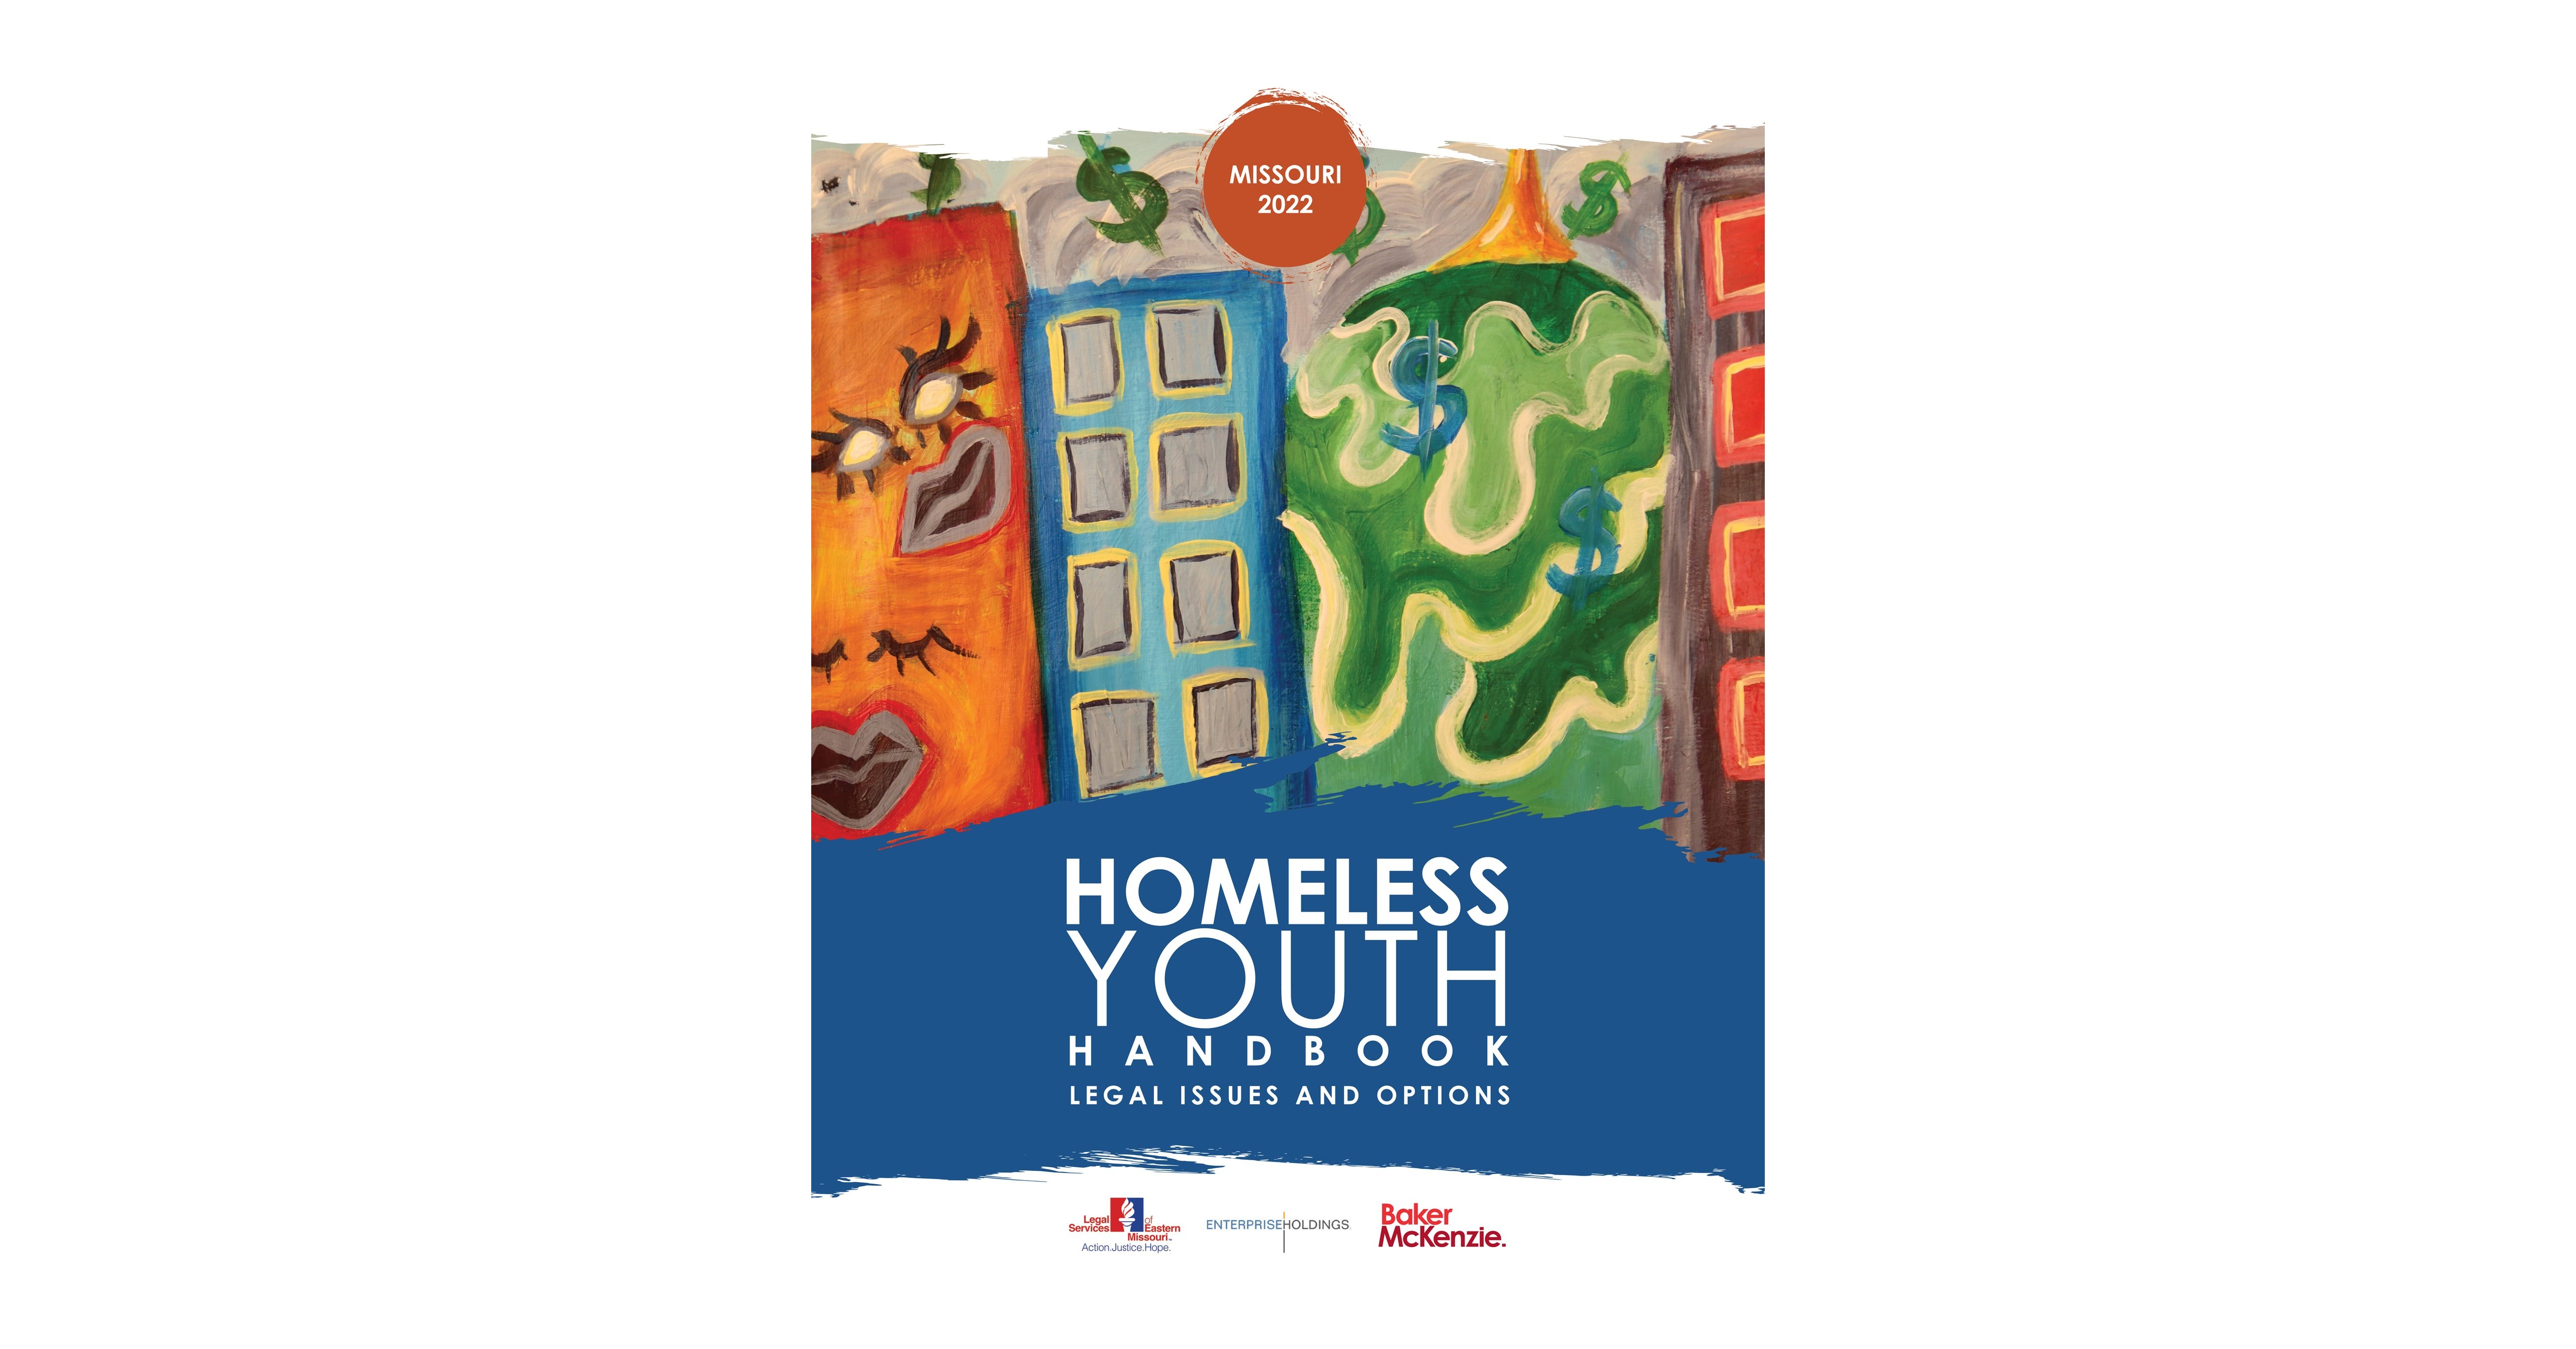 New Handbook Released for Missouri Homeless Youth and Advocates